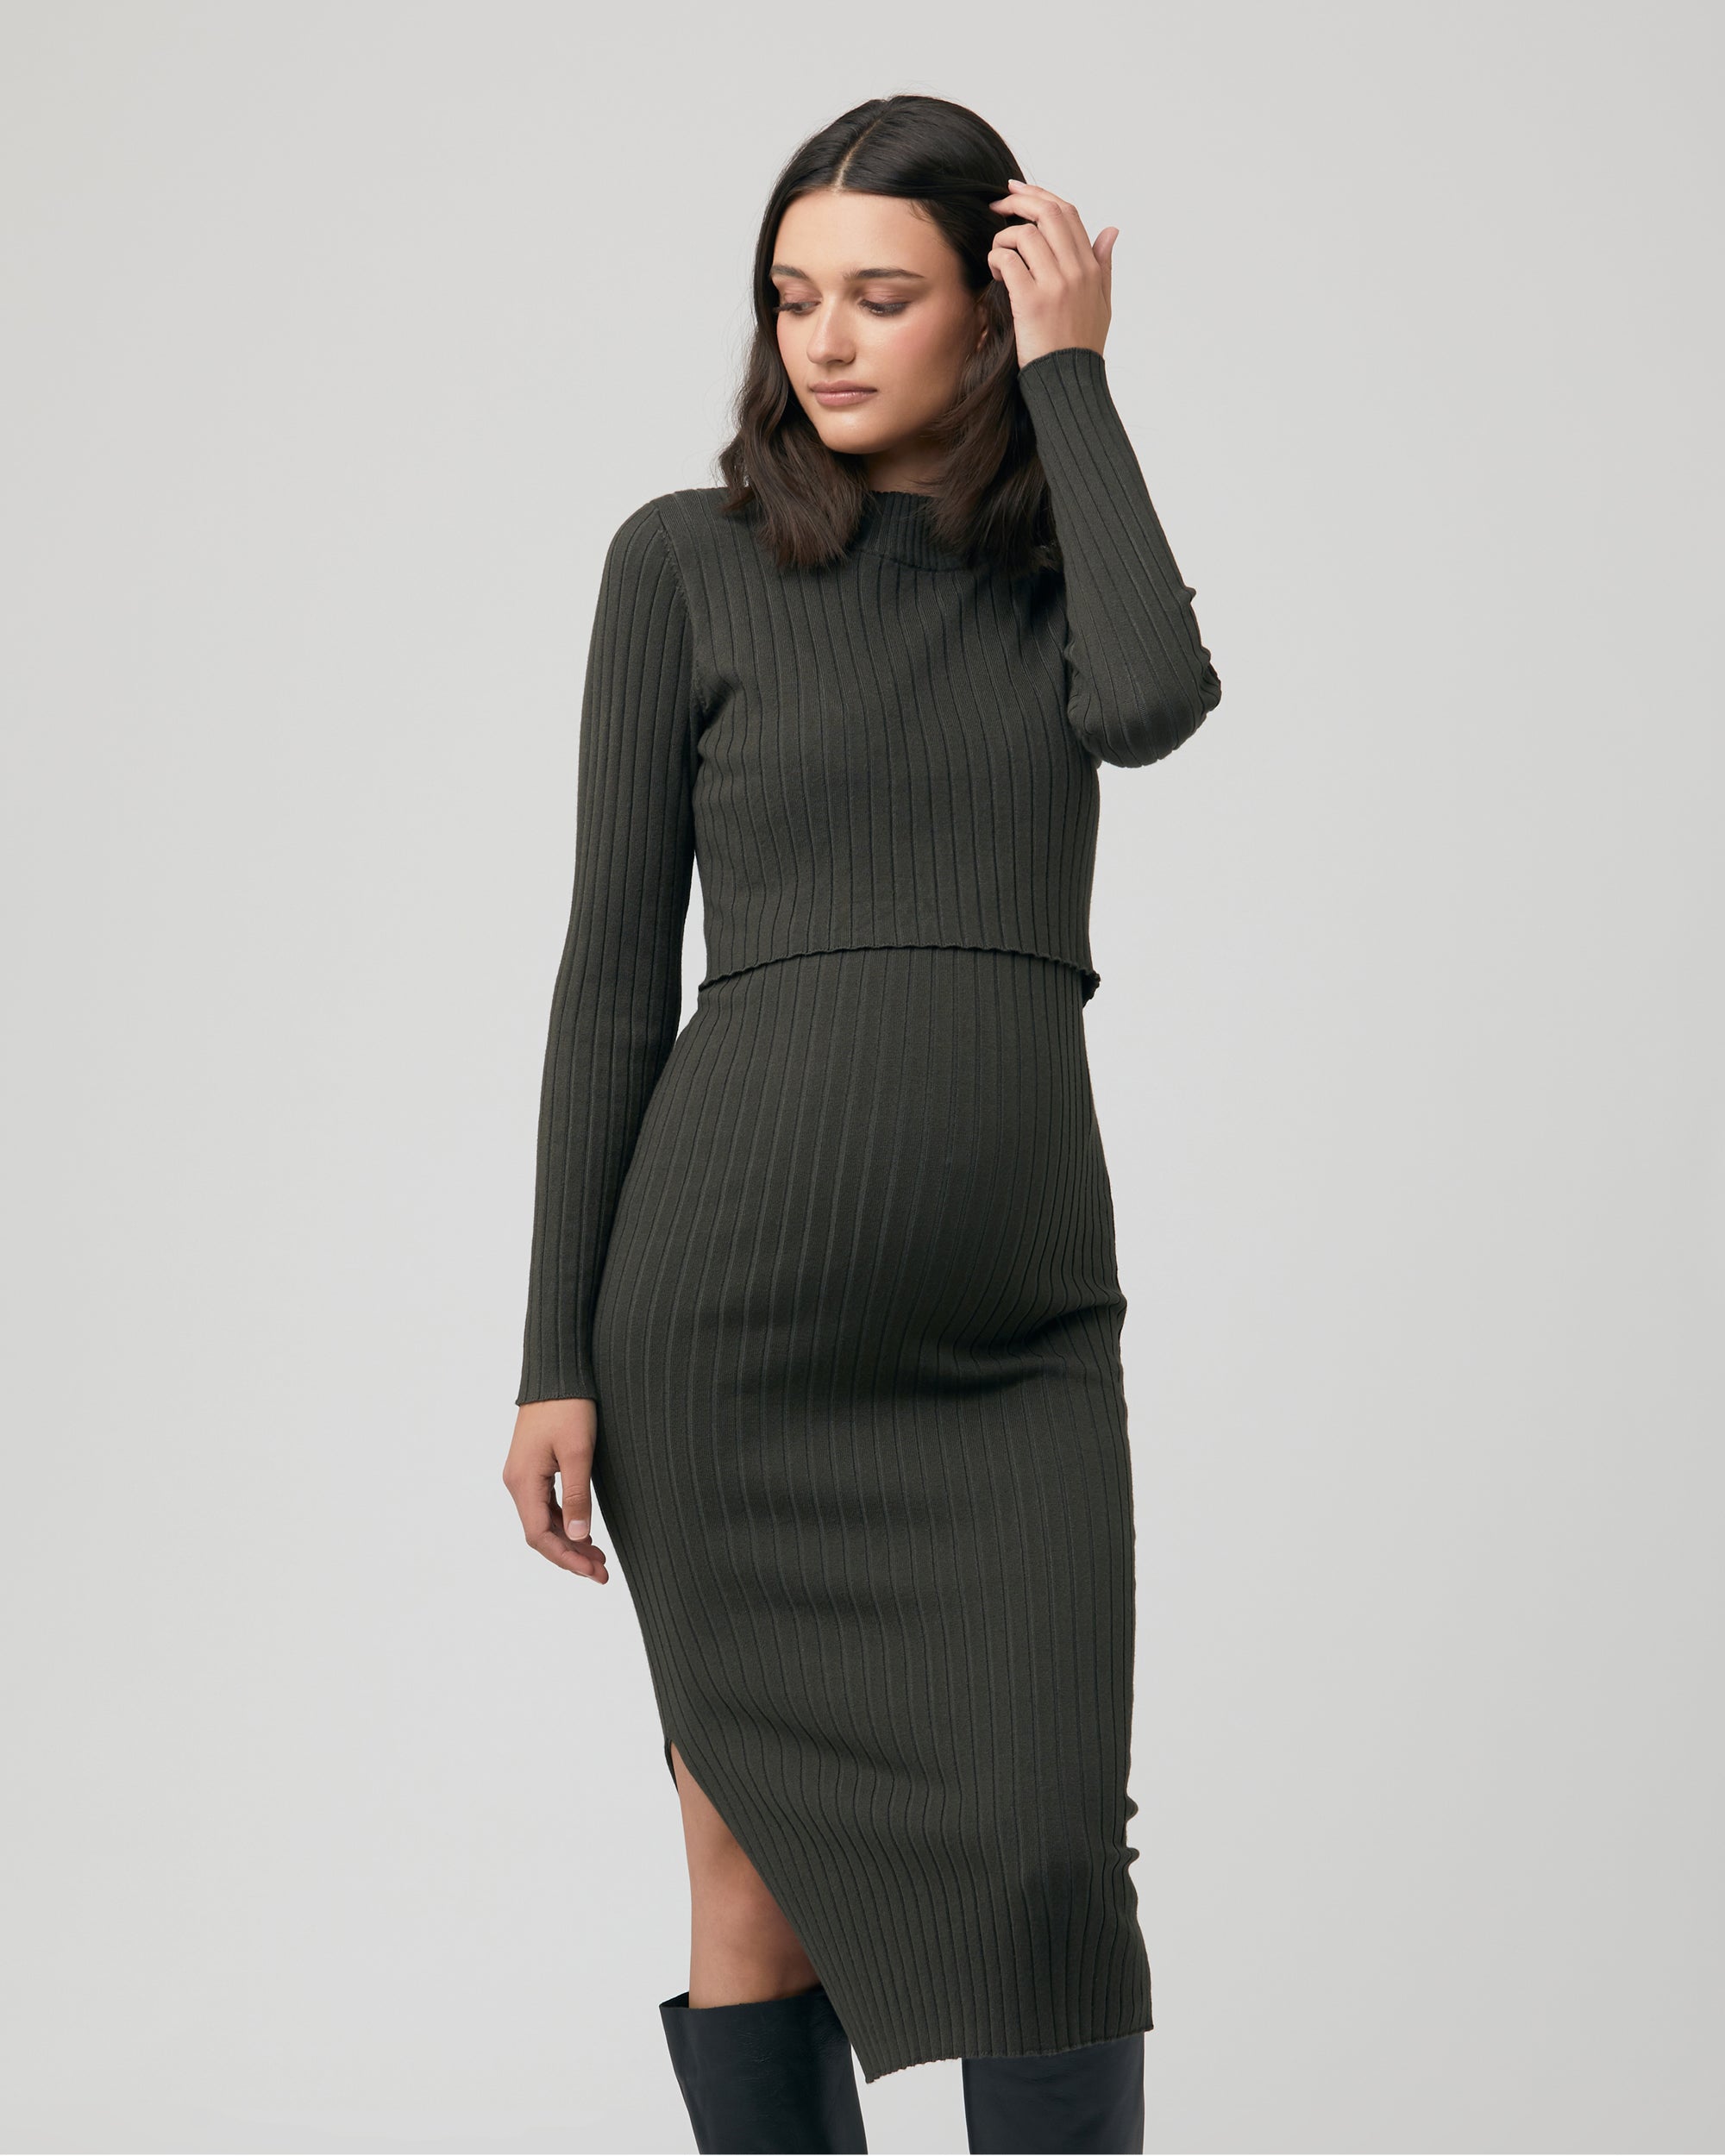 Maternity Double Layer Knitted Nursing Dress